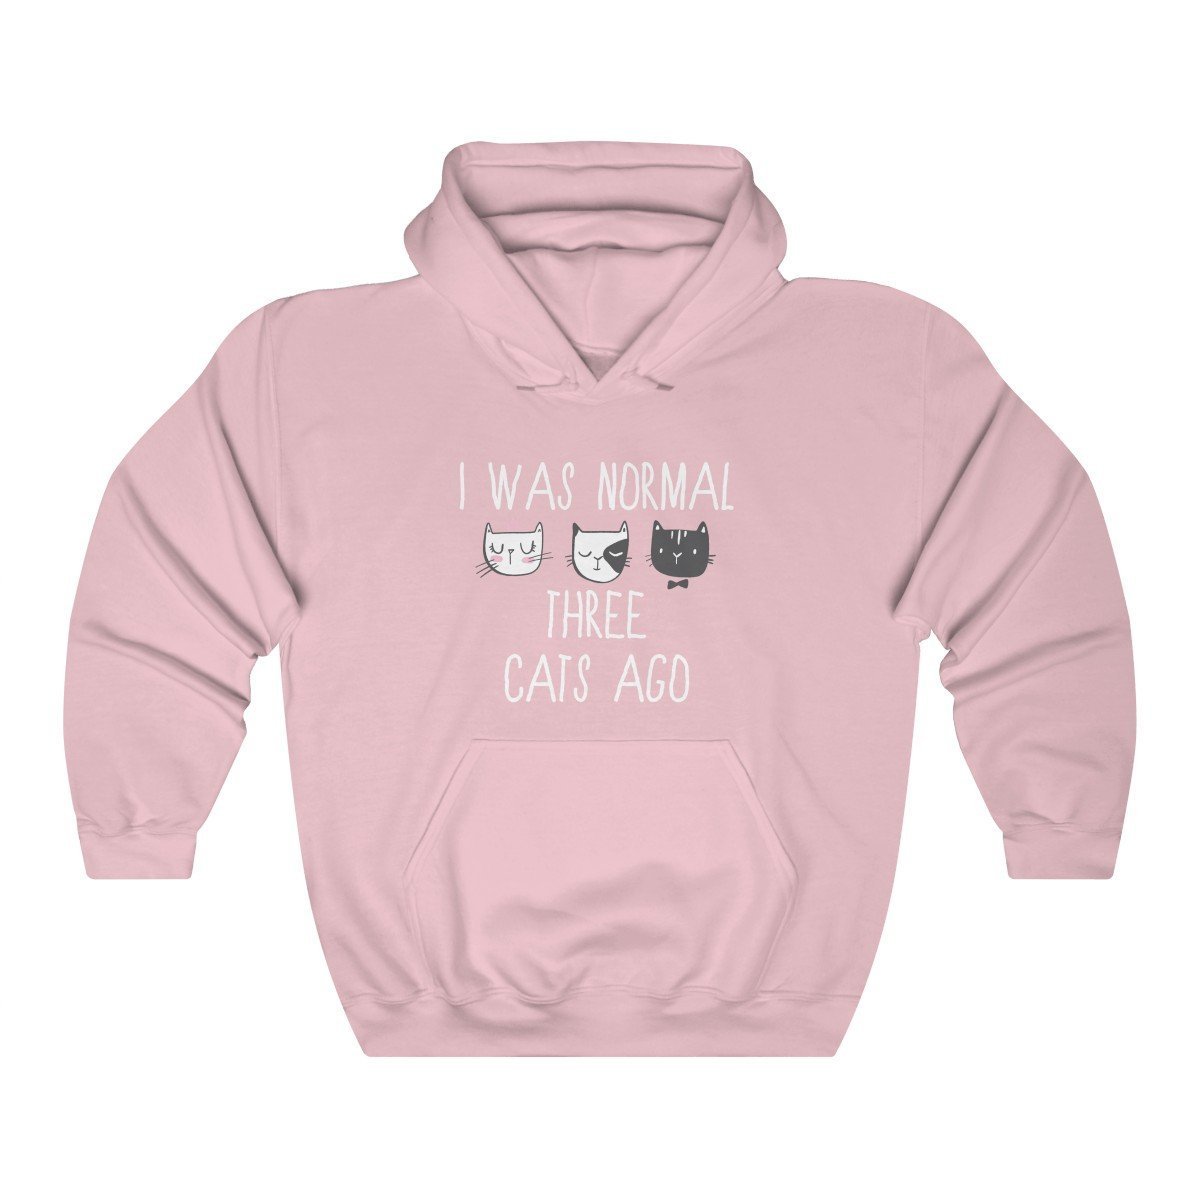 Funny Cat Sweaters, Cat Sweatshirt for Women with the Text I Was Normal Three Cats Ago Printed On the Front